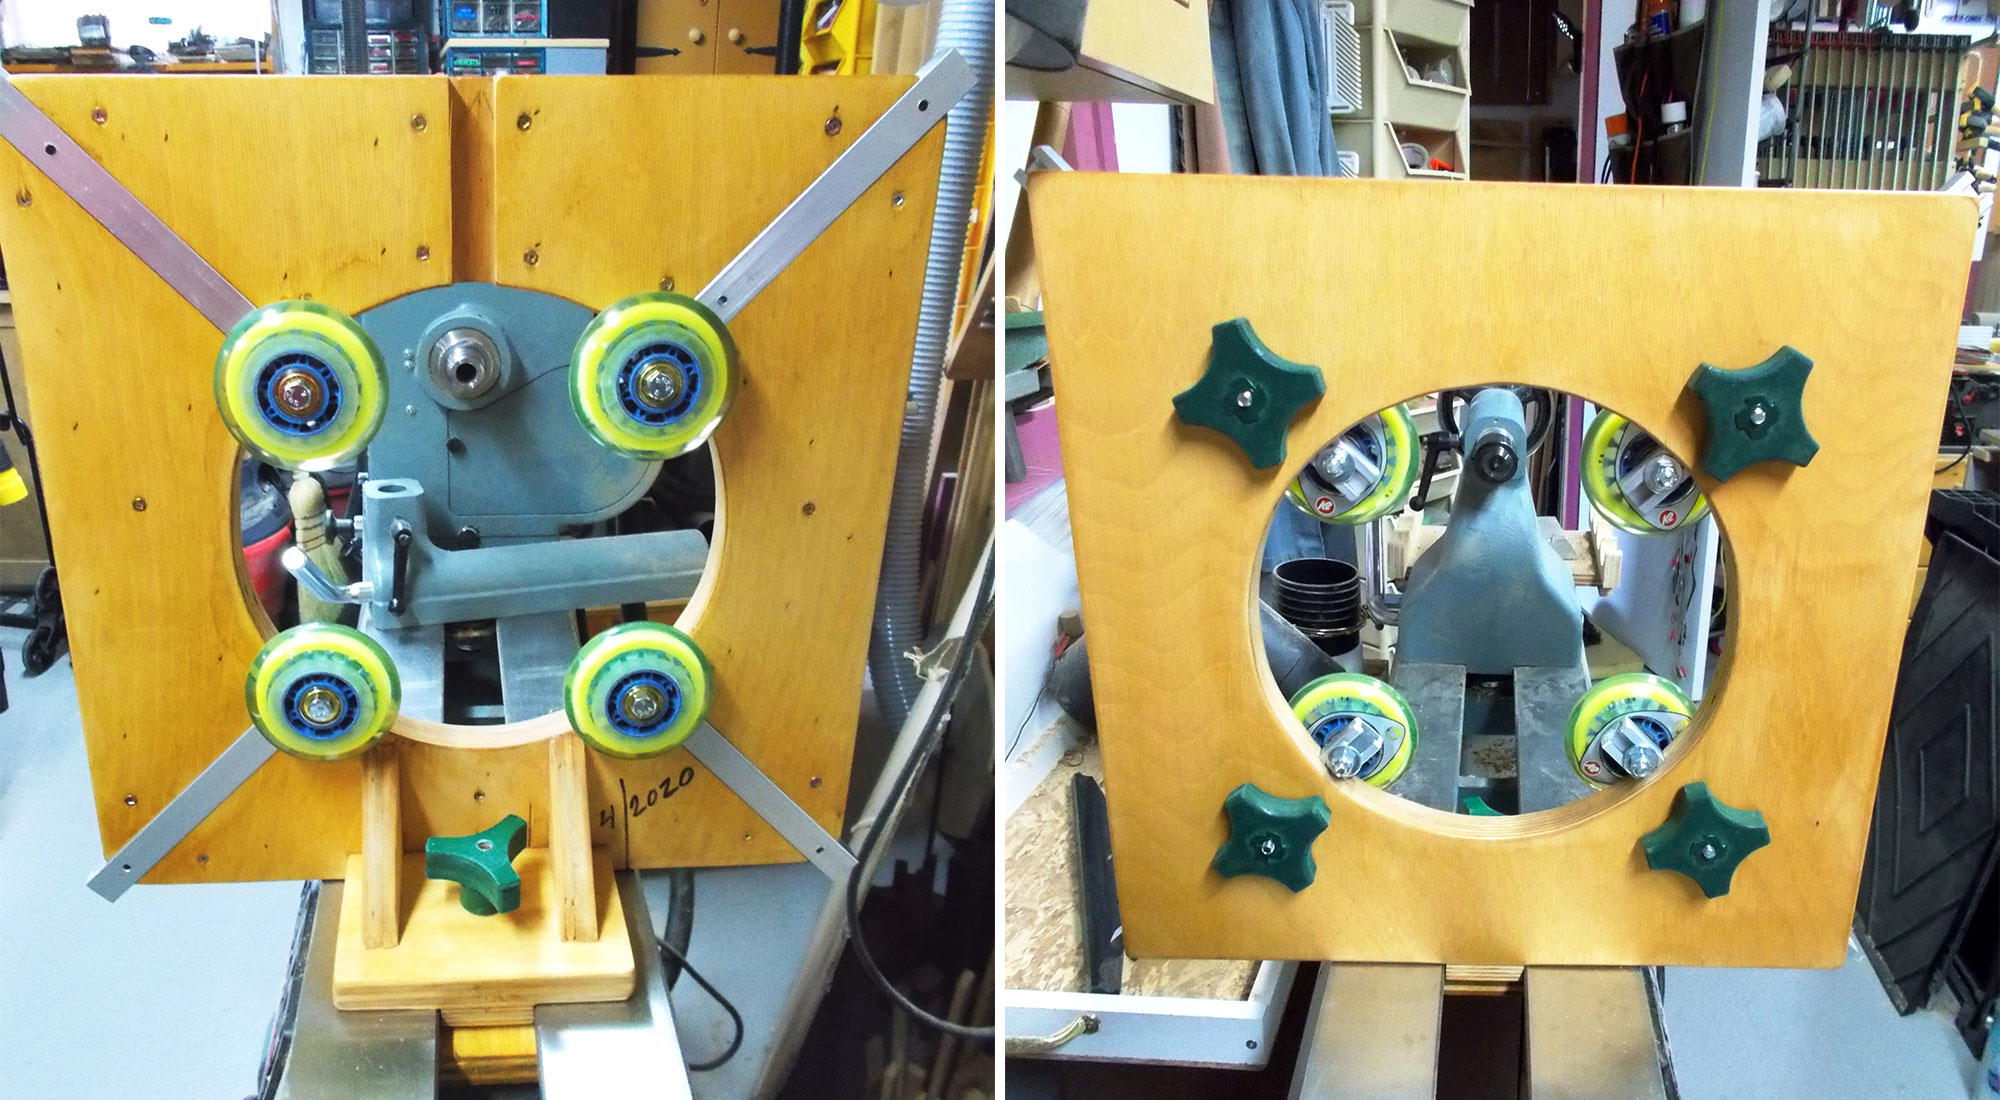 Left: The completed steady rest – front and back. Right: Completed steady rest – back.